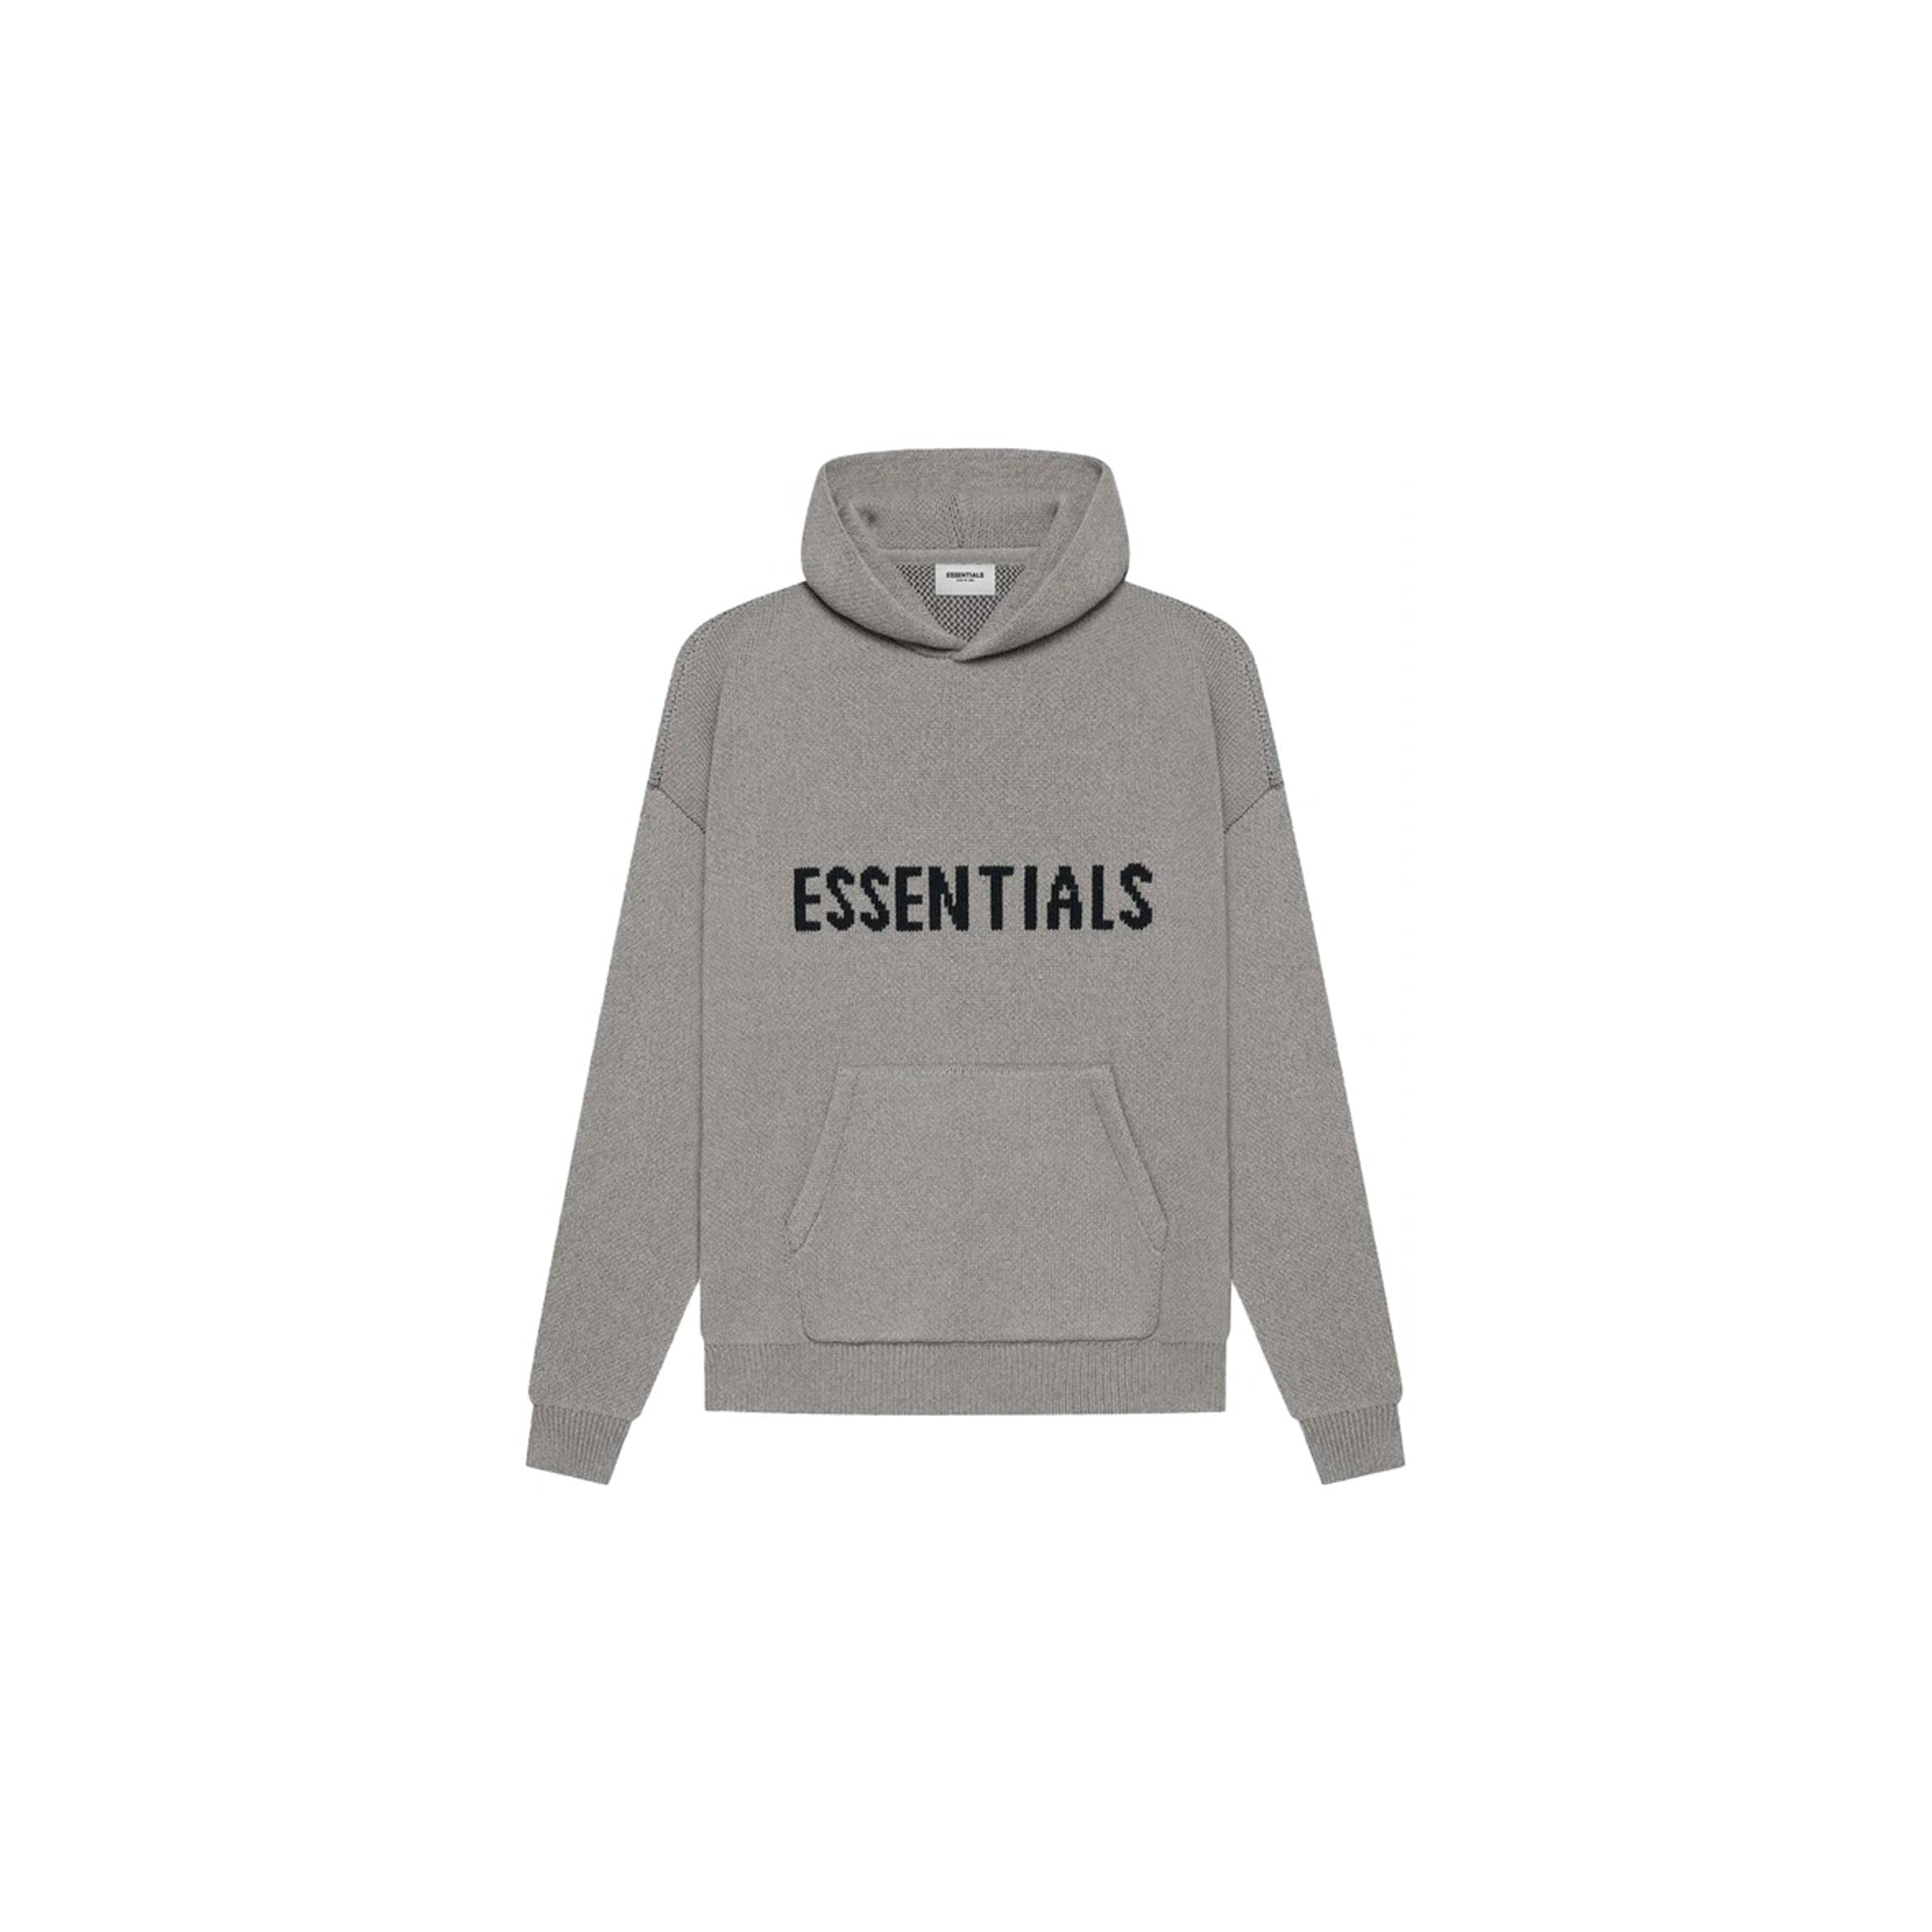 FEAR OF GOD ESSENTIALS KNIT PULLOVER HOODIE DARK HEATHER OATMEAL (SS21)